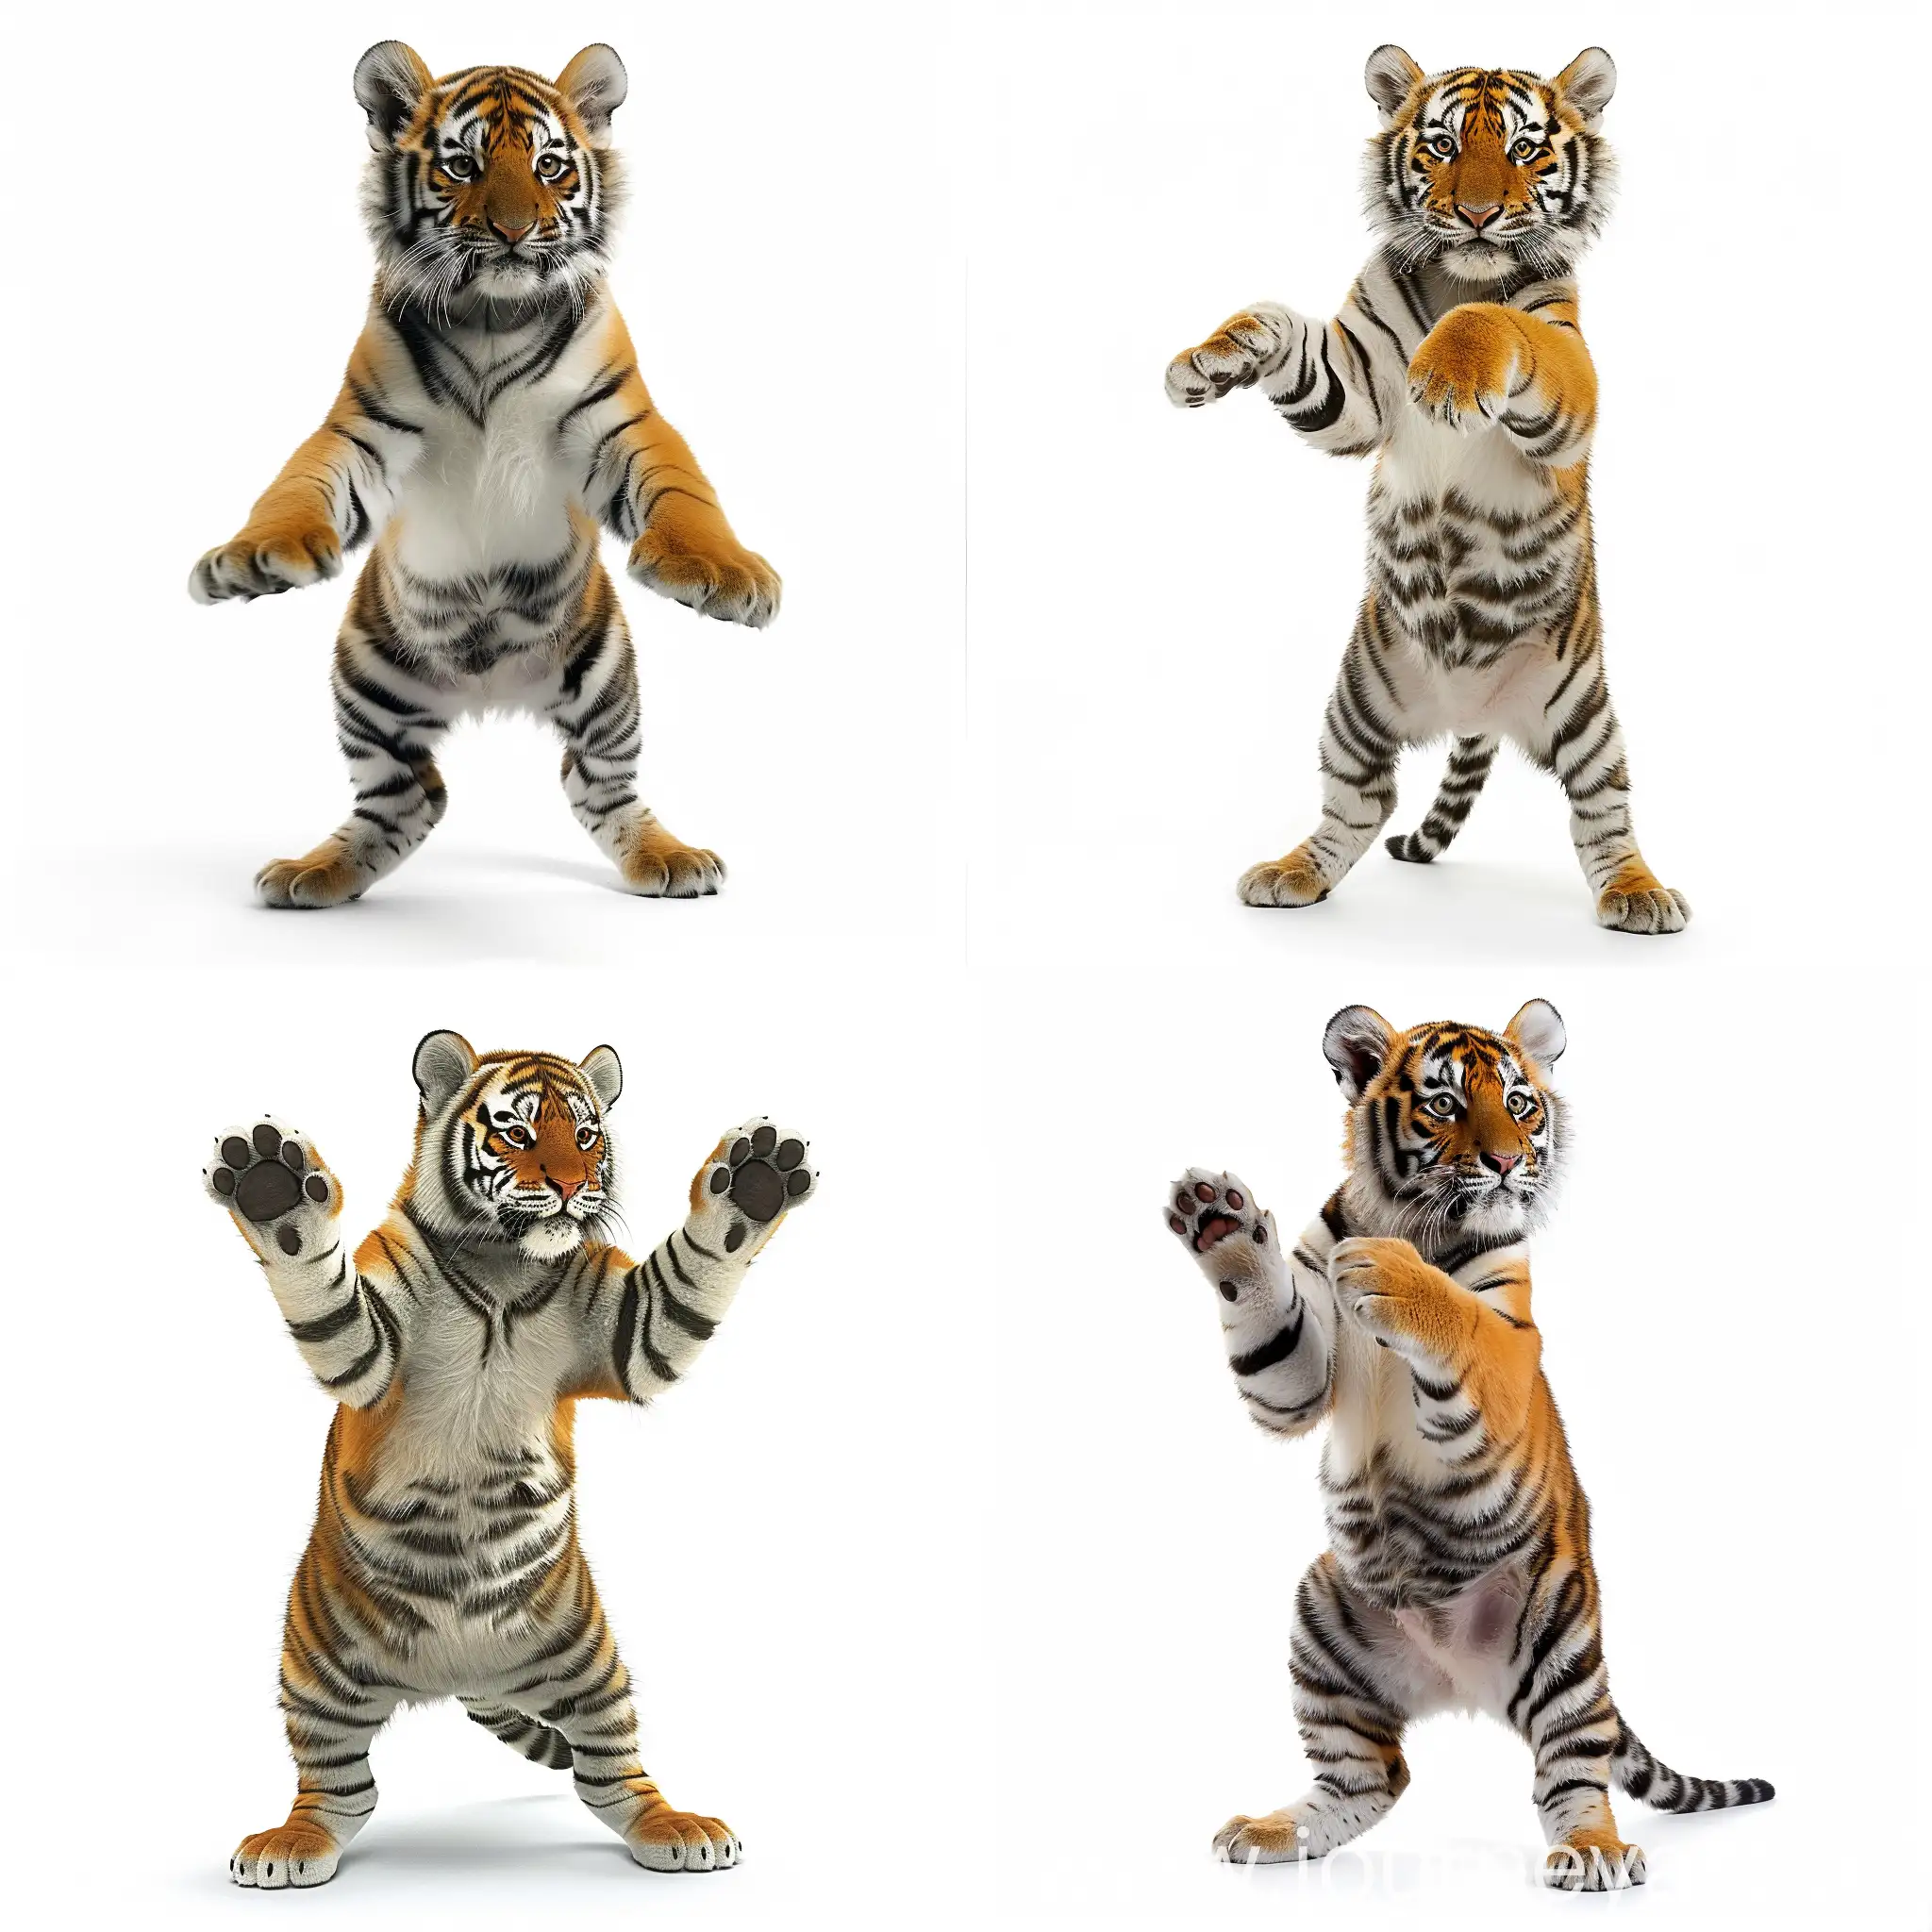 children's style, cartoon style, Disney style, anthropomorphic tiger cub - standing on his hind legs at full height, front view, white background, front paws to the sides